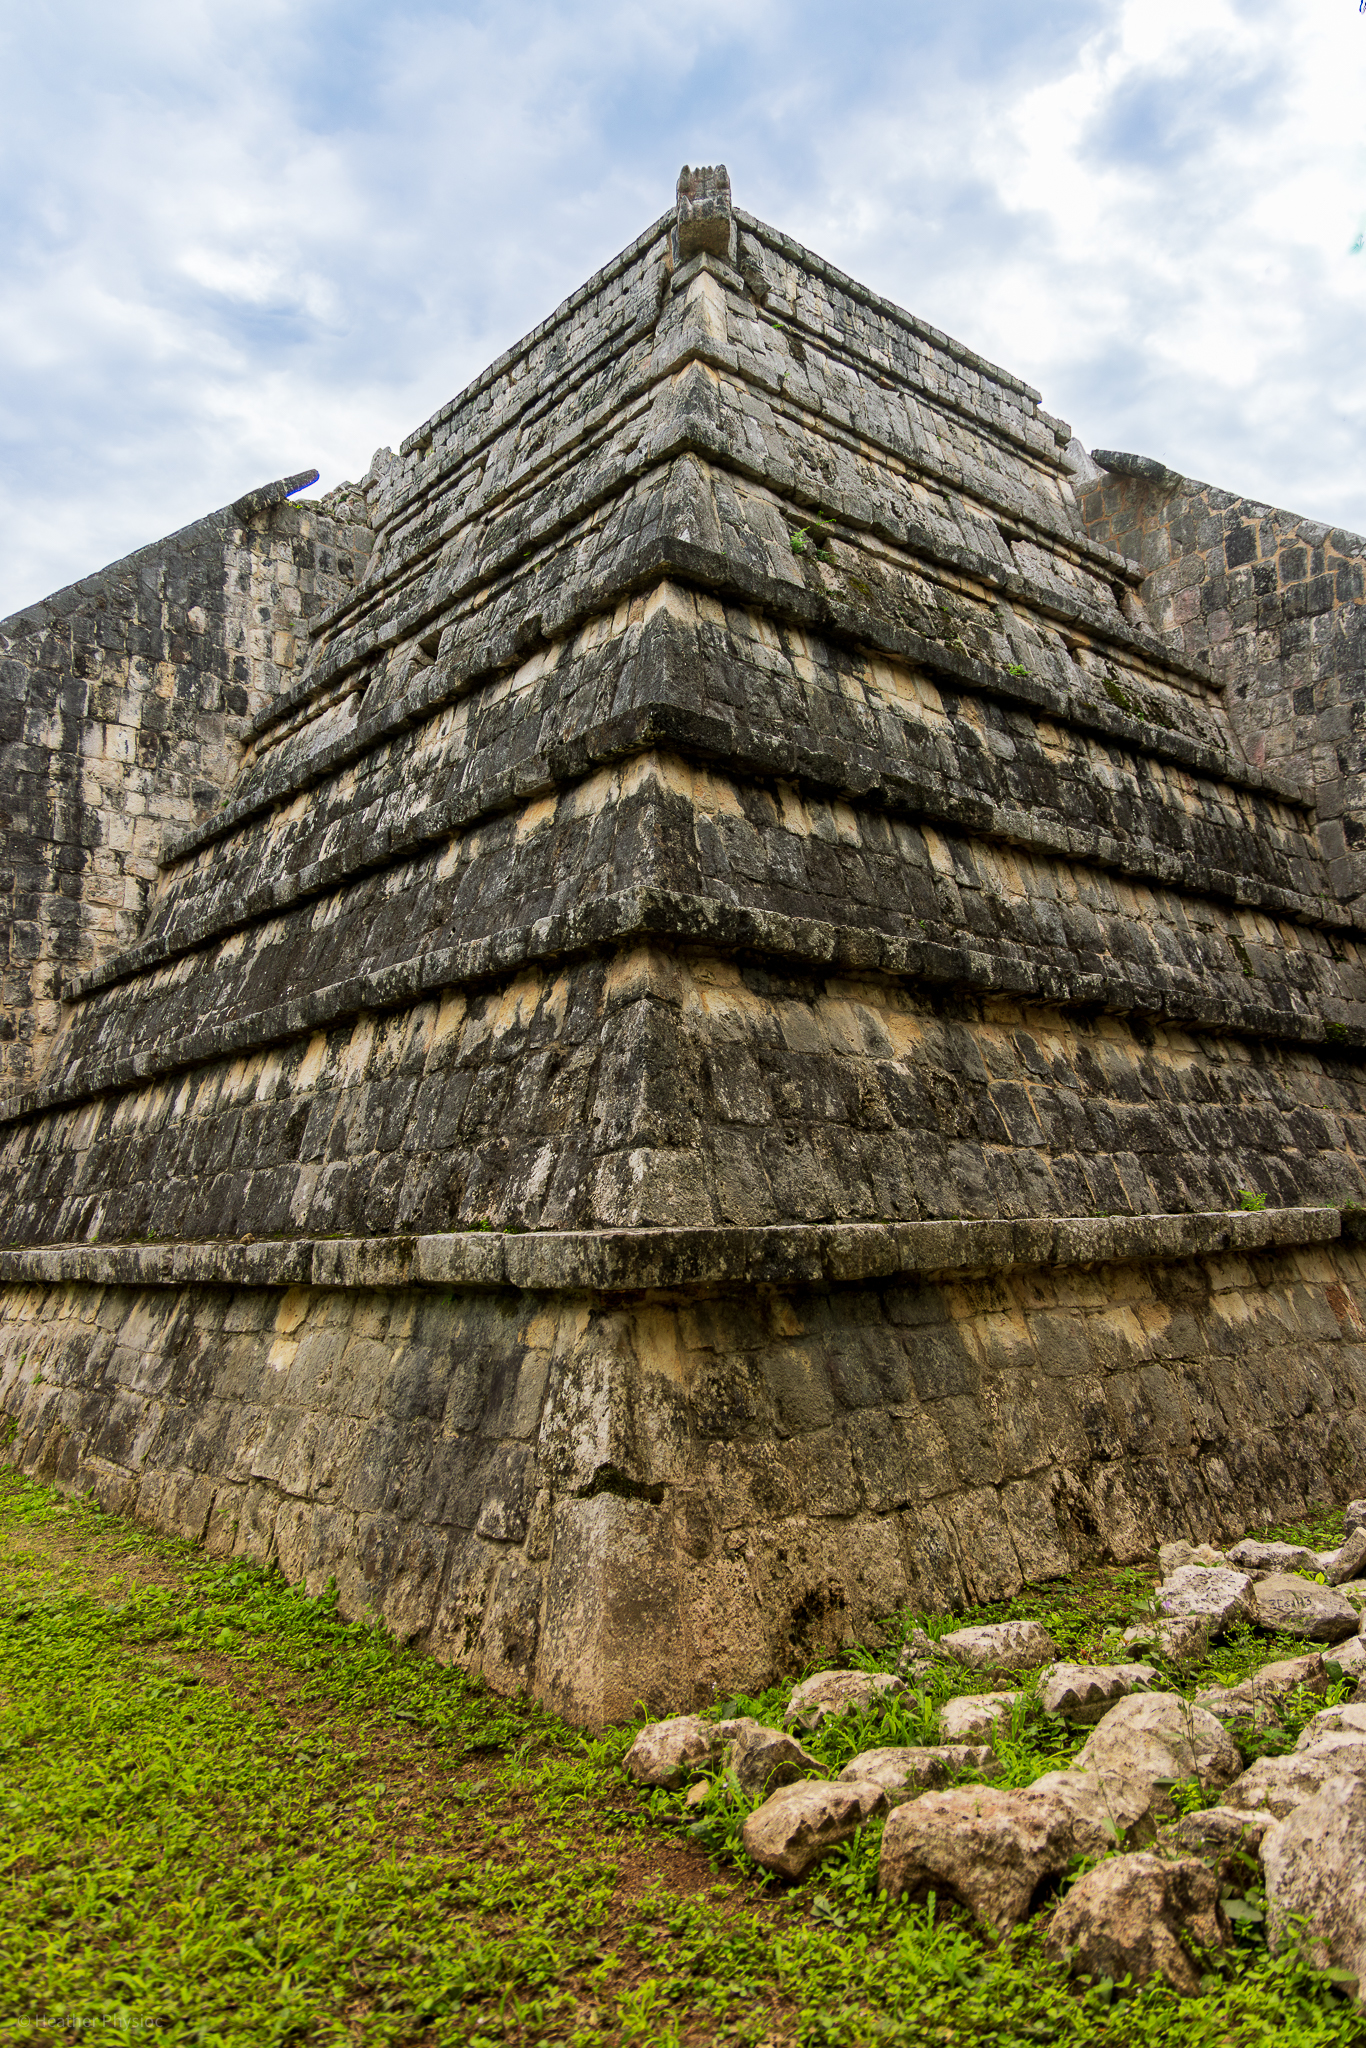 The Ossuary, or High Priest's Grave, at Chichen Itza, seen from a low angle, highlighting the layered platforms and the temple's rounded corners against a soft cloudy sky, with green grass at its base.